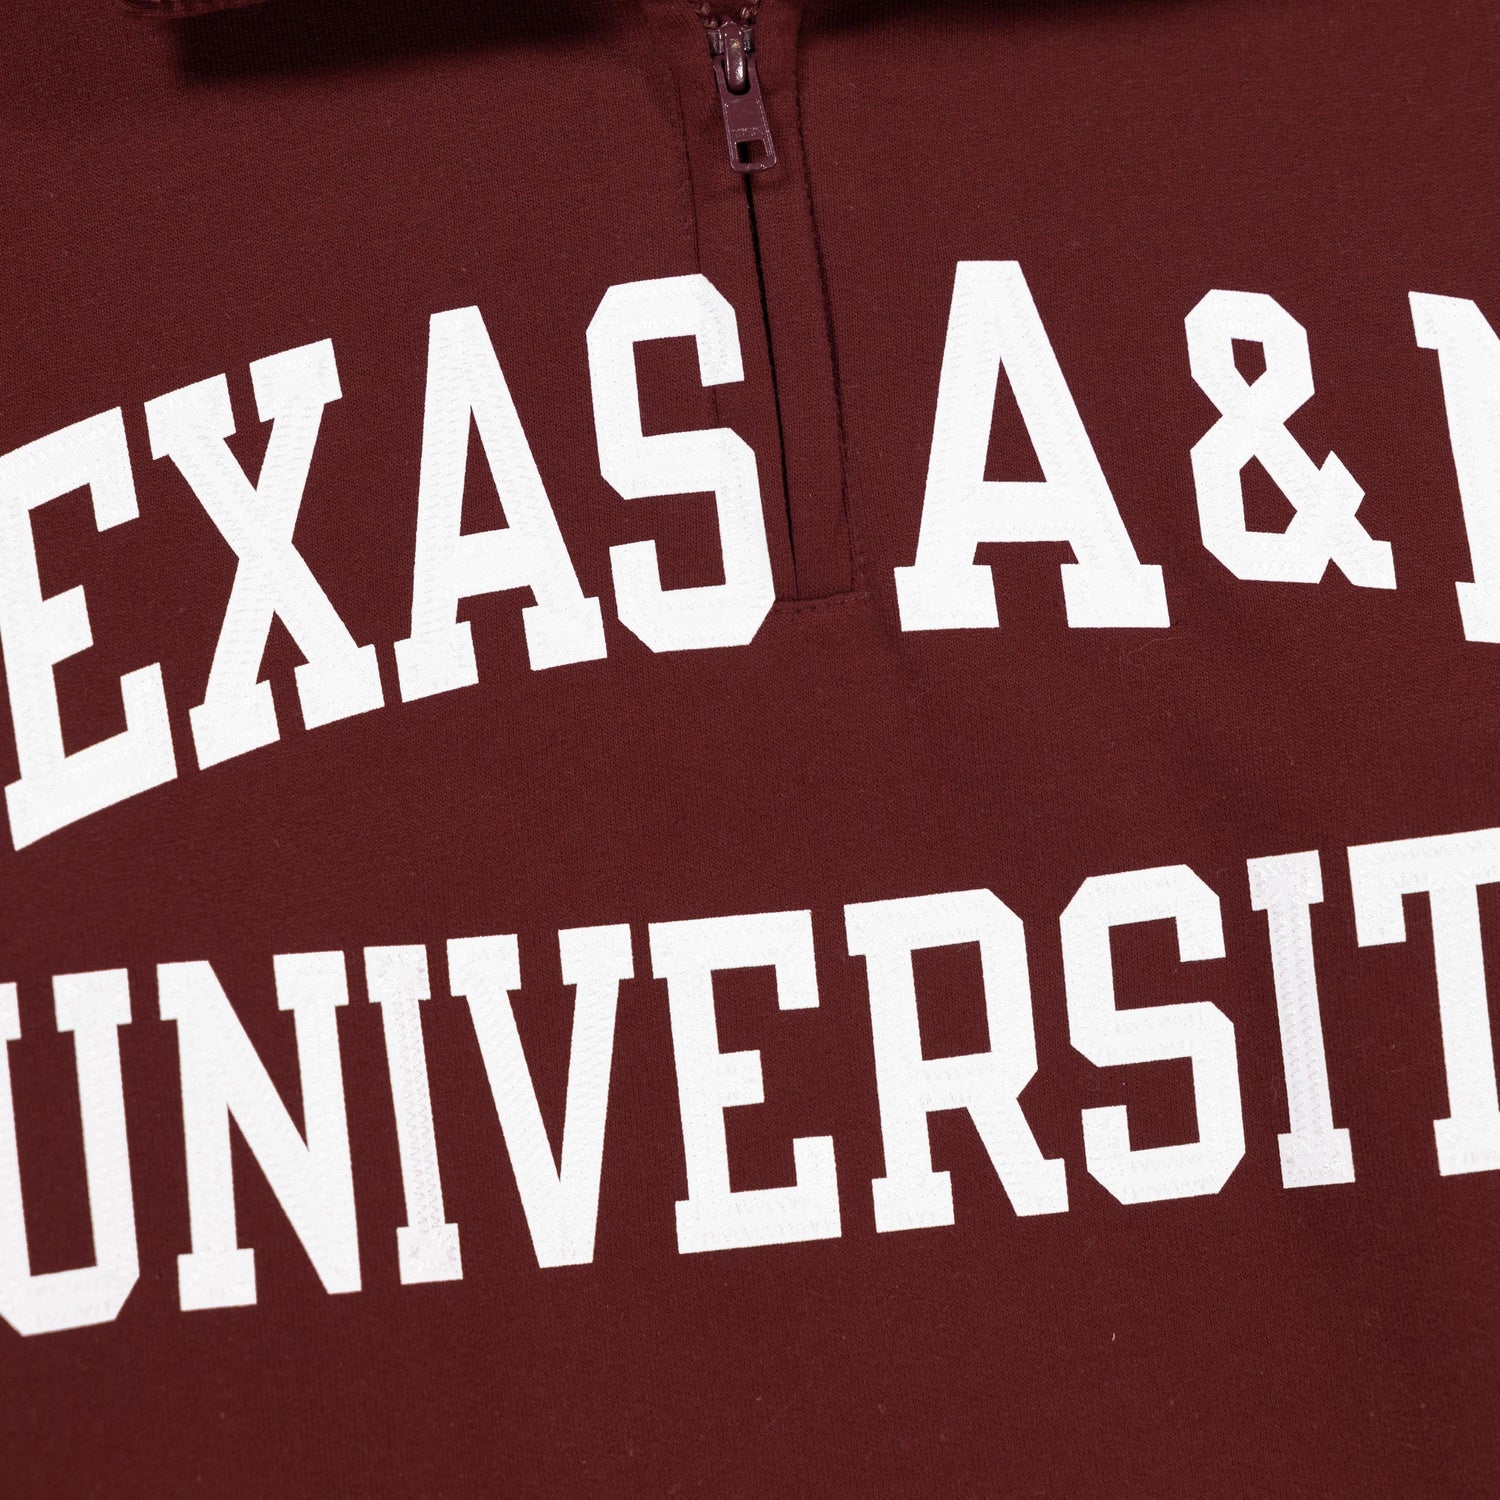 Texas A&M Champion Maroon Arched Powerblend Quarter Zip